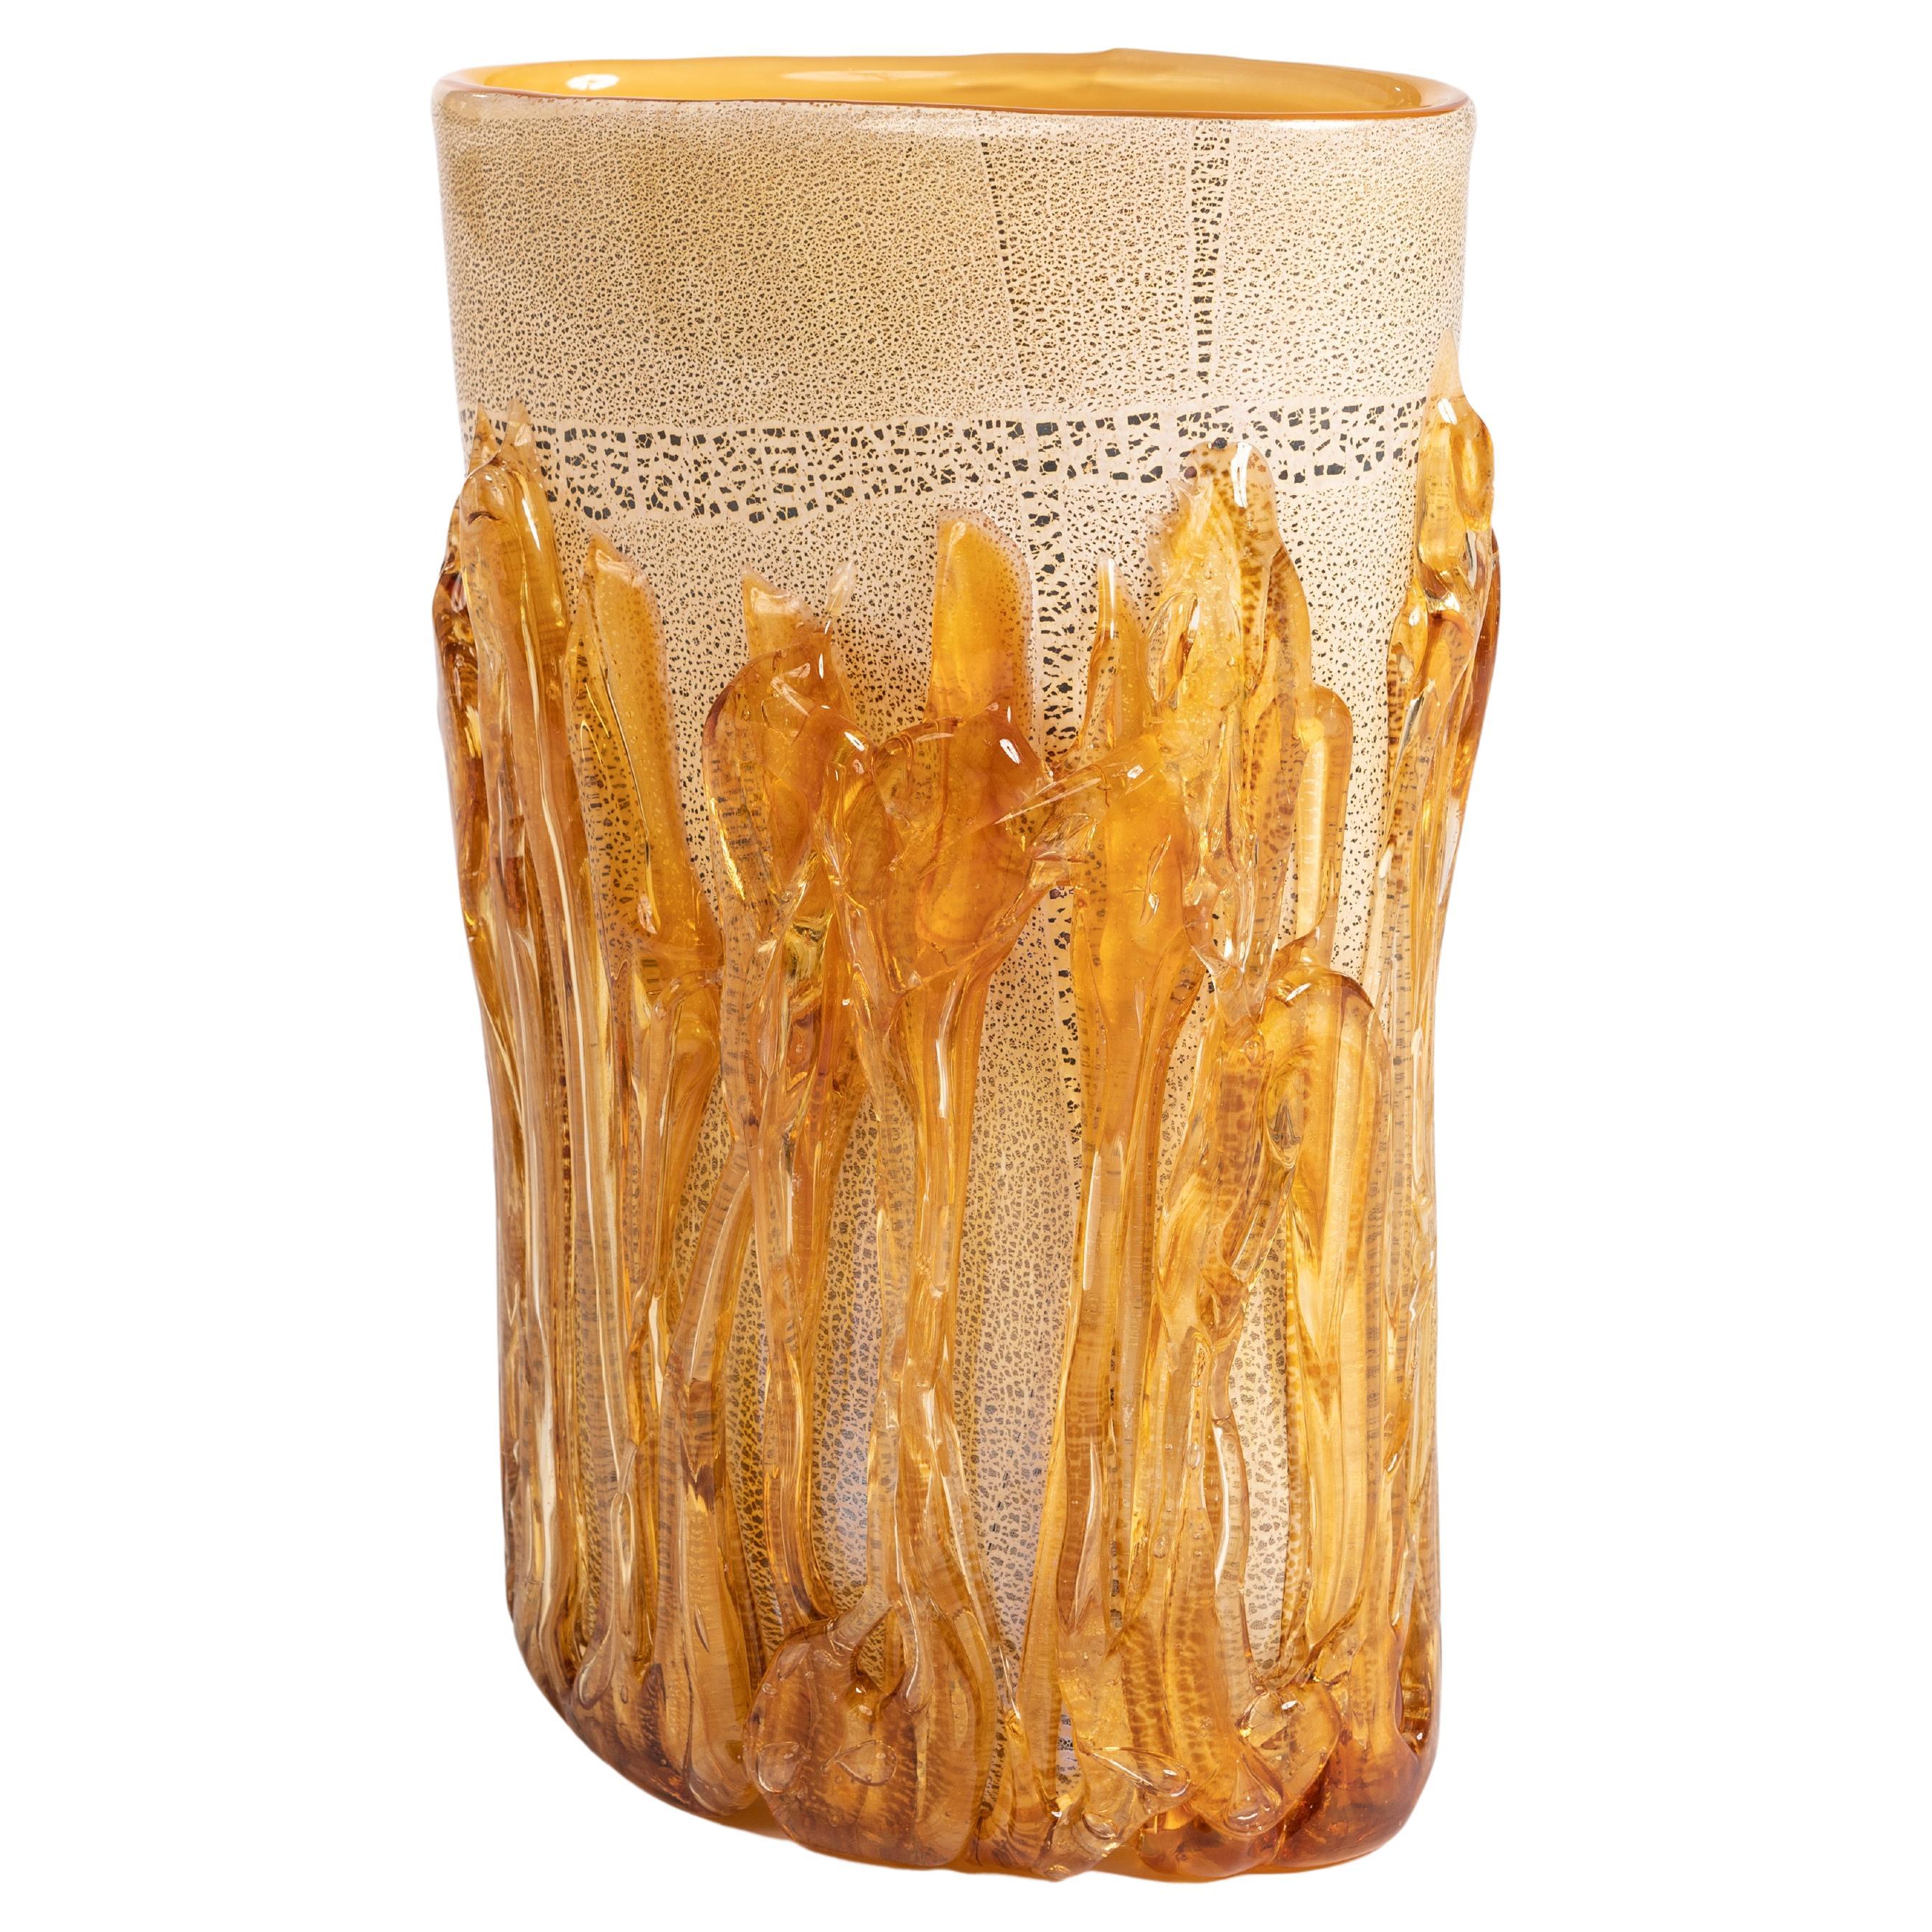 Modern Murano Glass Vase in Gold-Amber Color signed by Hand, Italy 2015